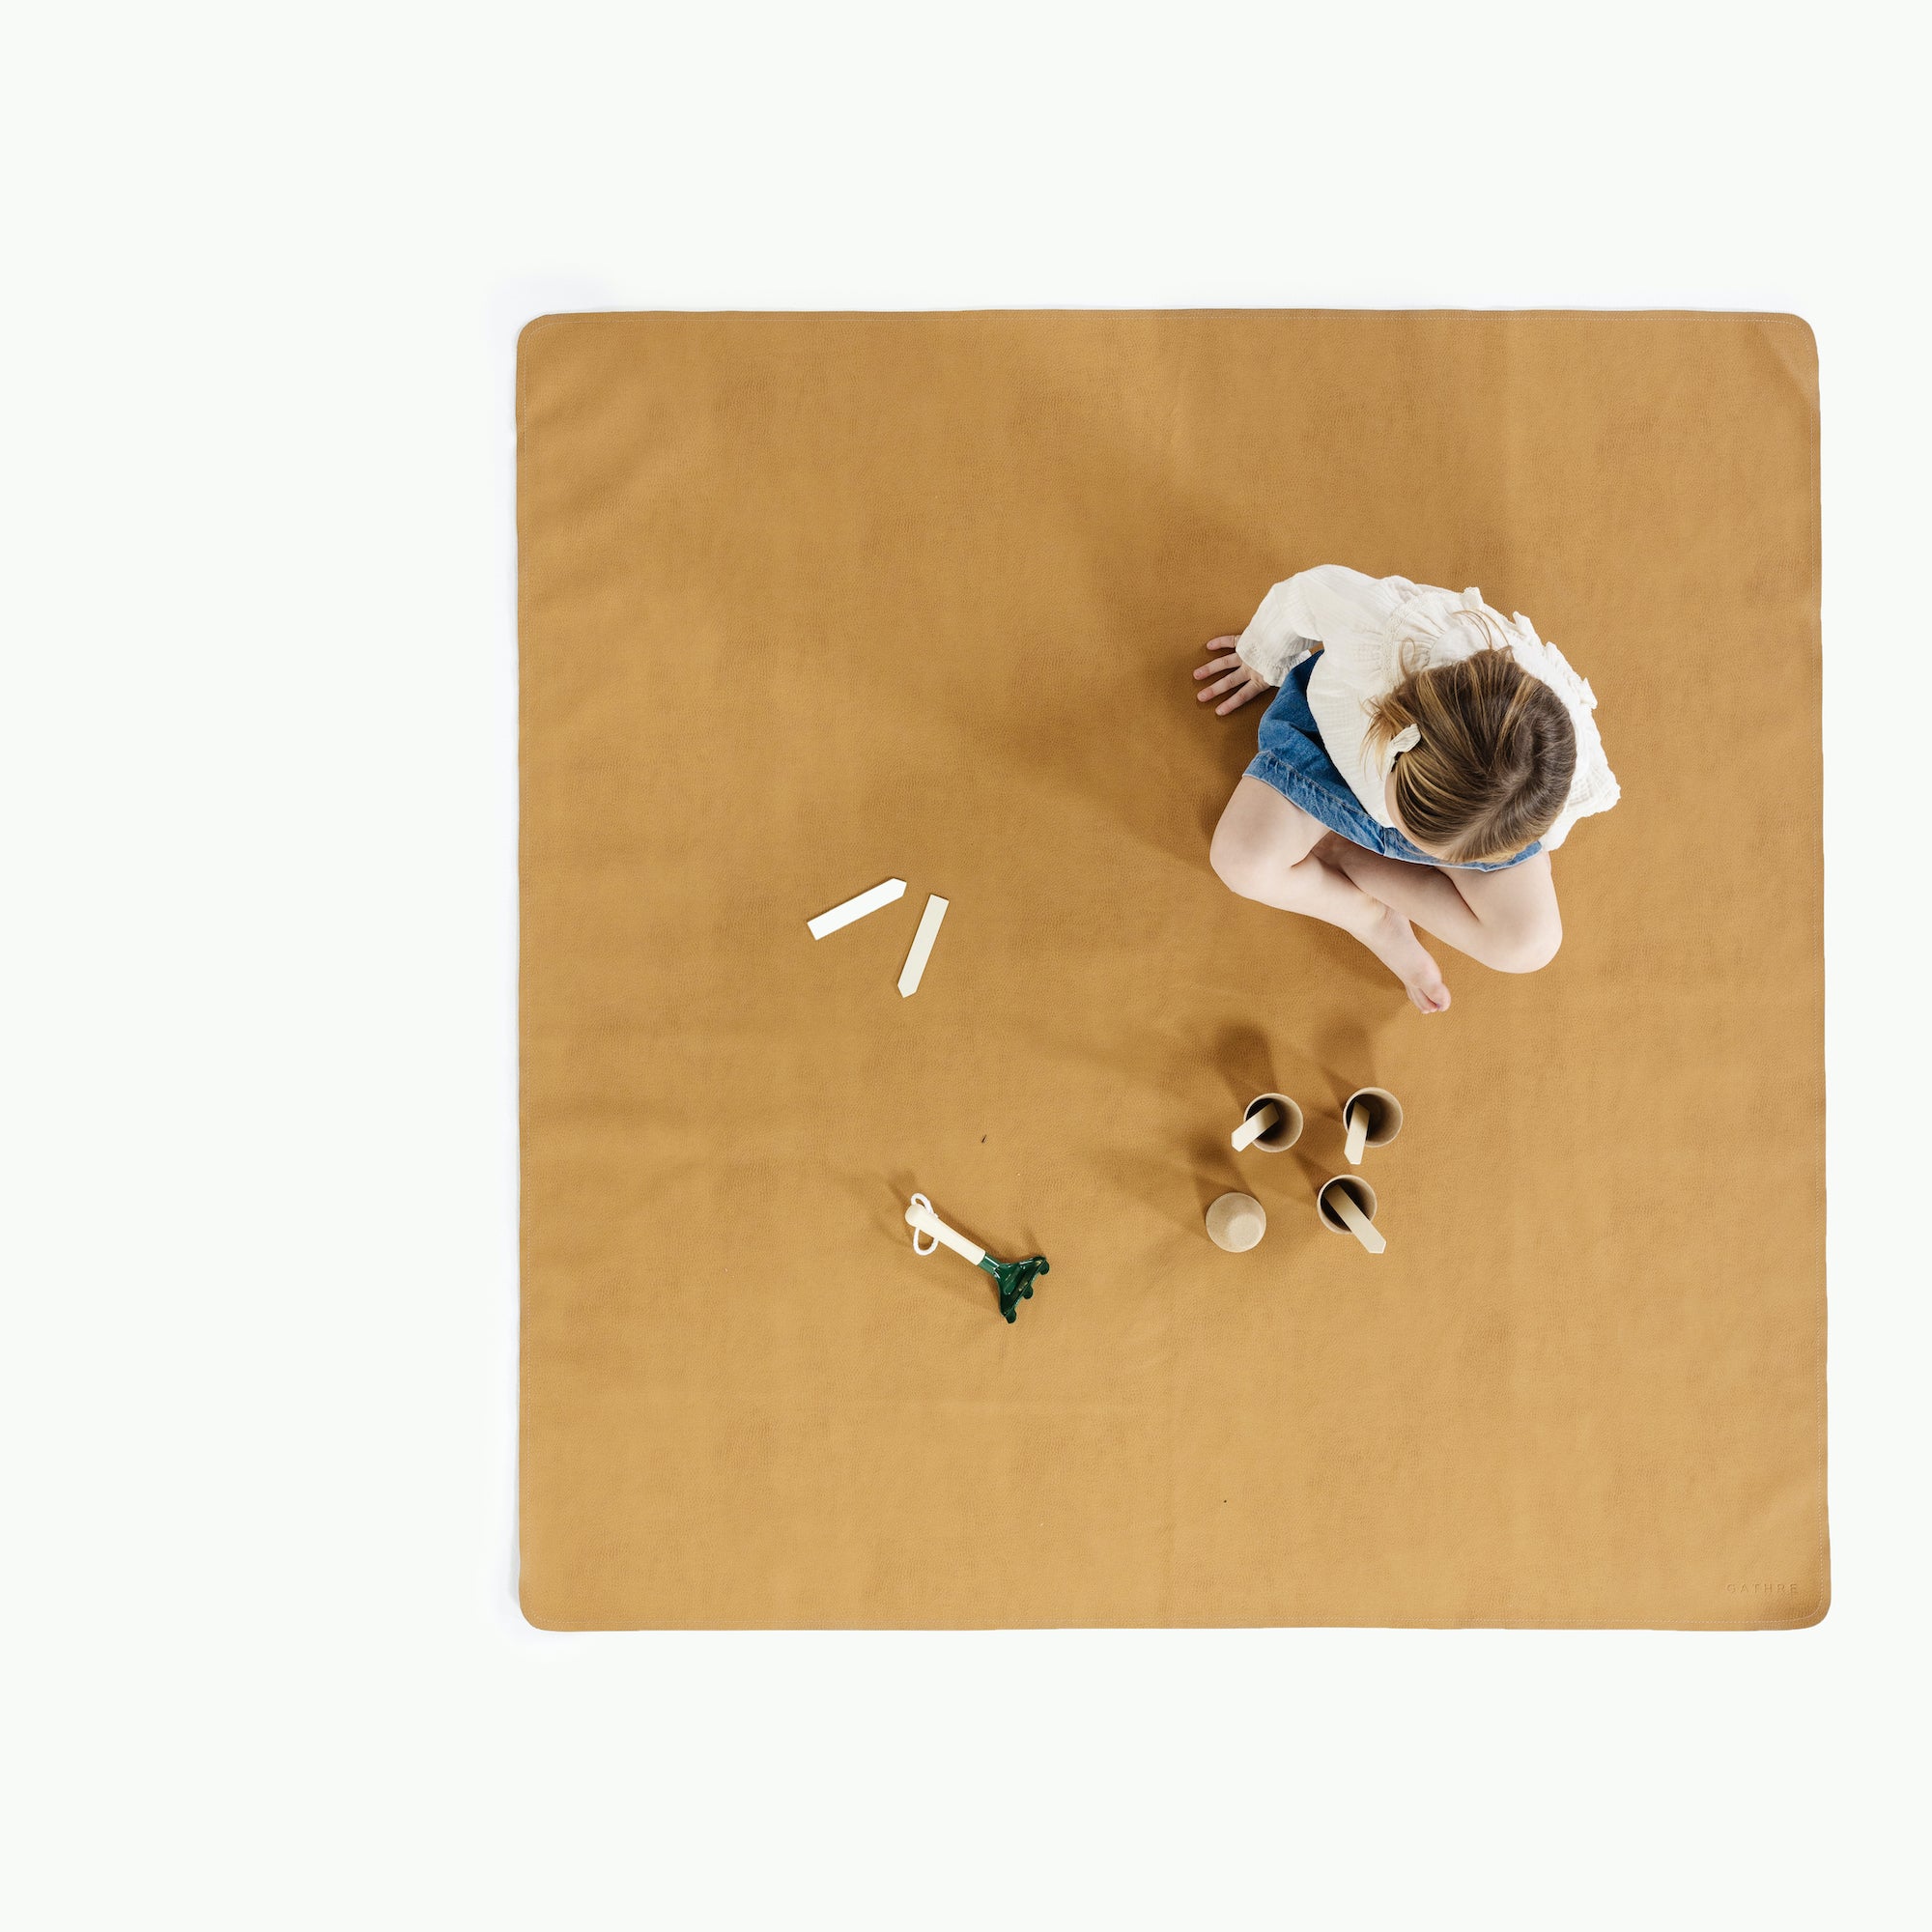 Tassel / Square@overhead of girl playing on mat